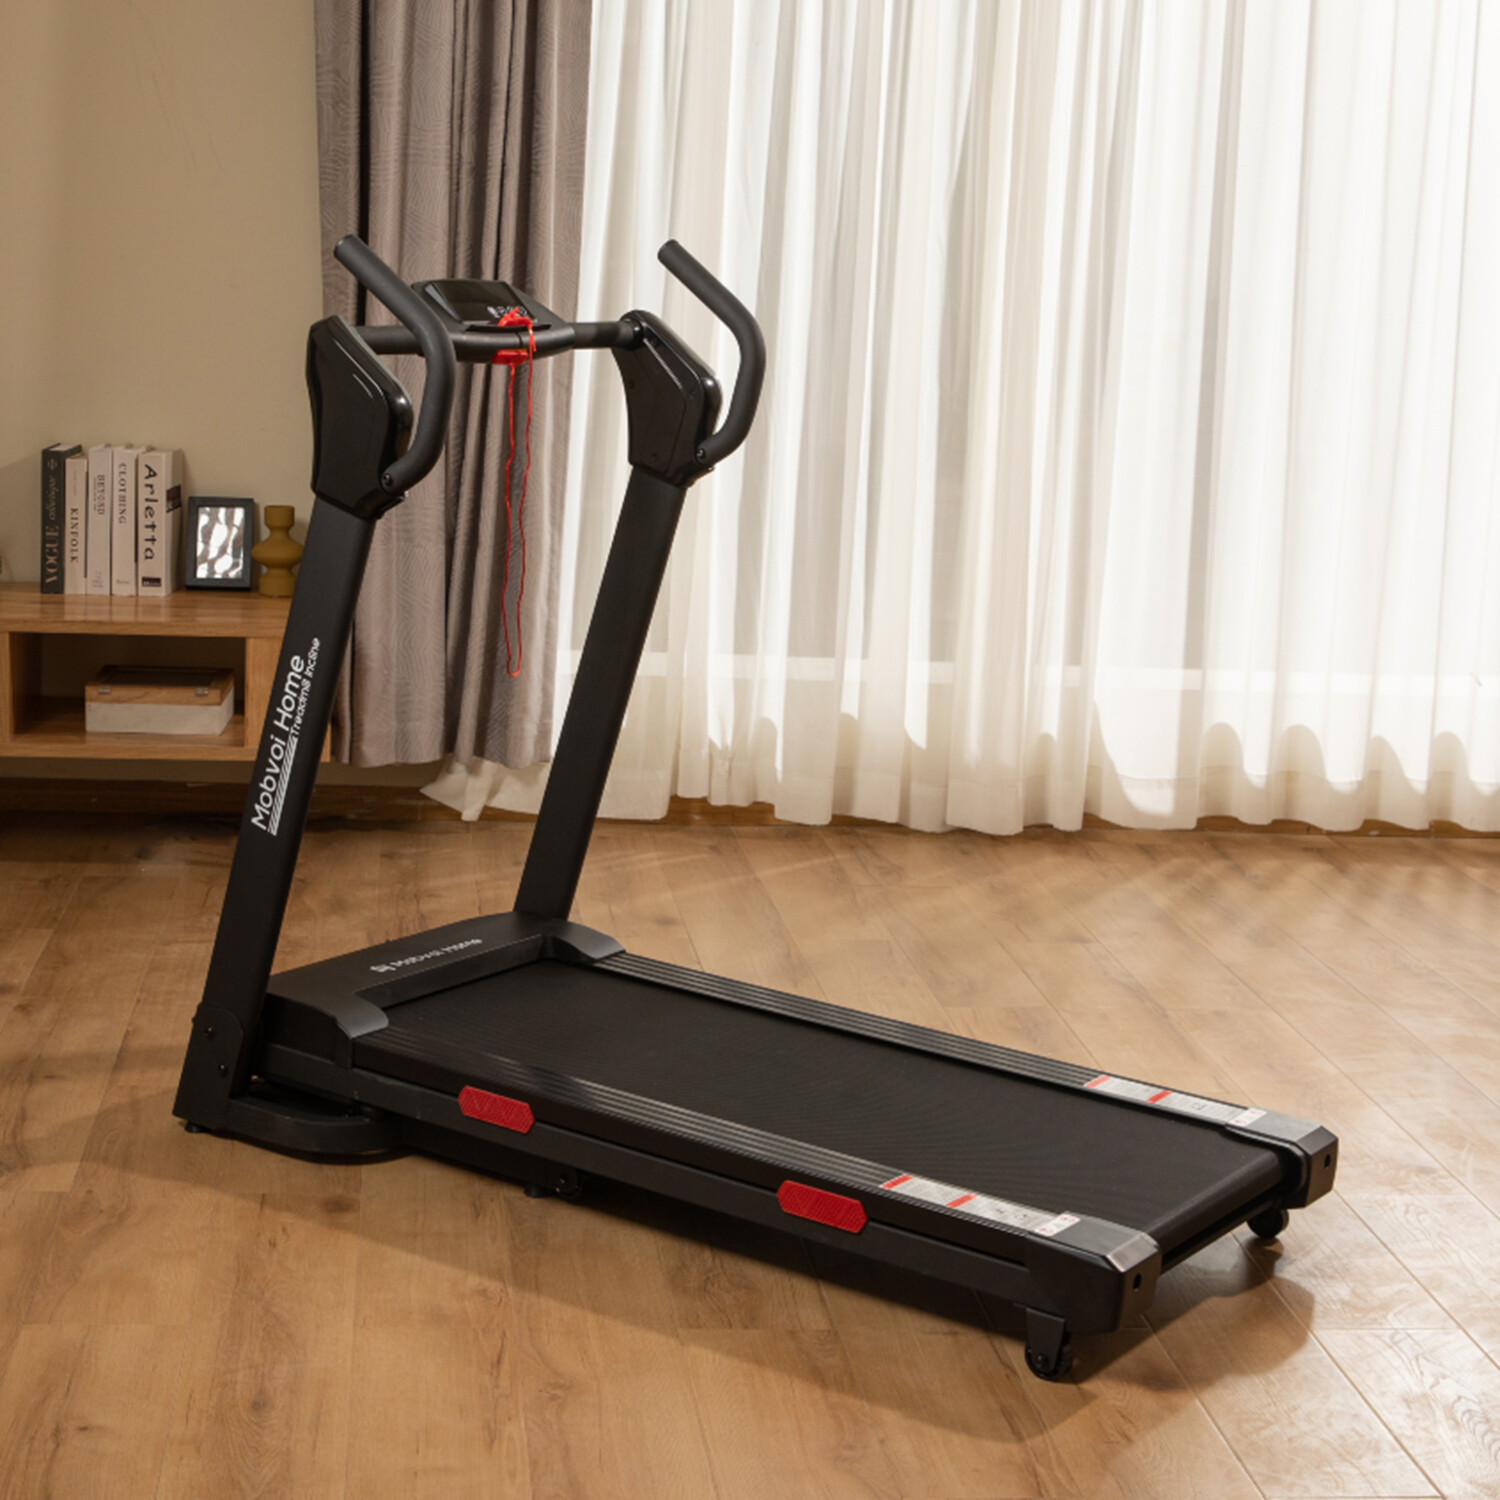 Mobvoi Home Treadmill Review